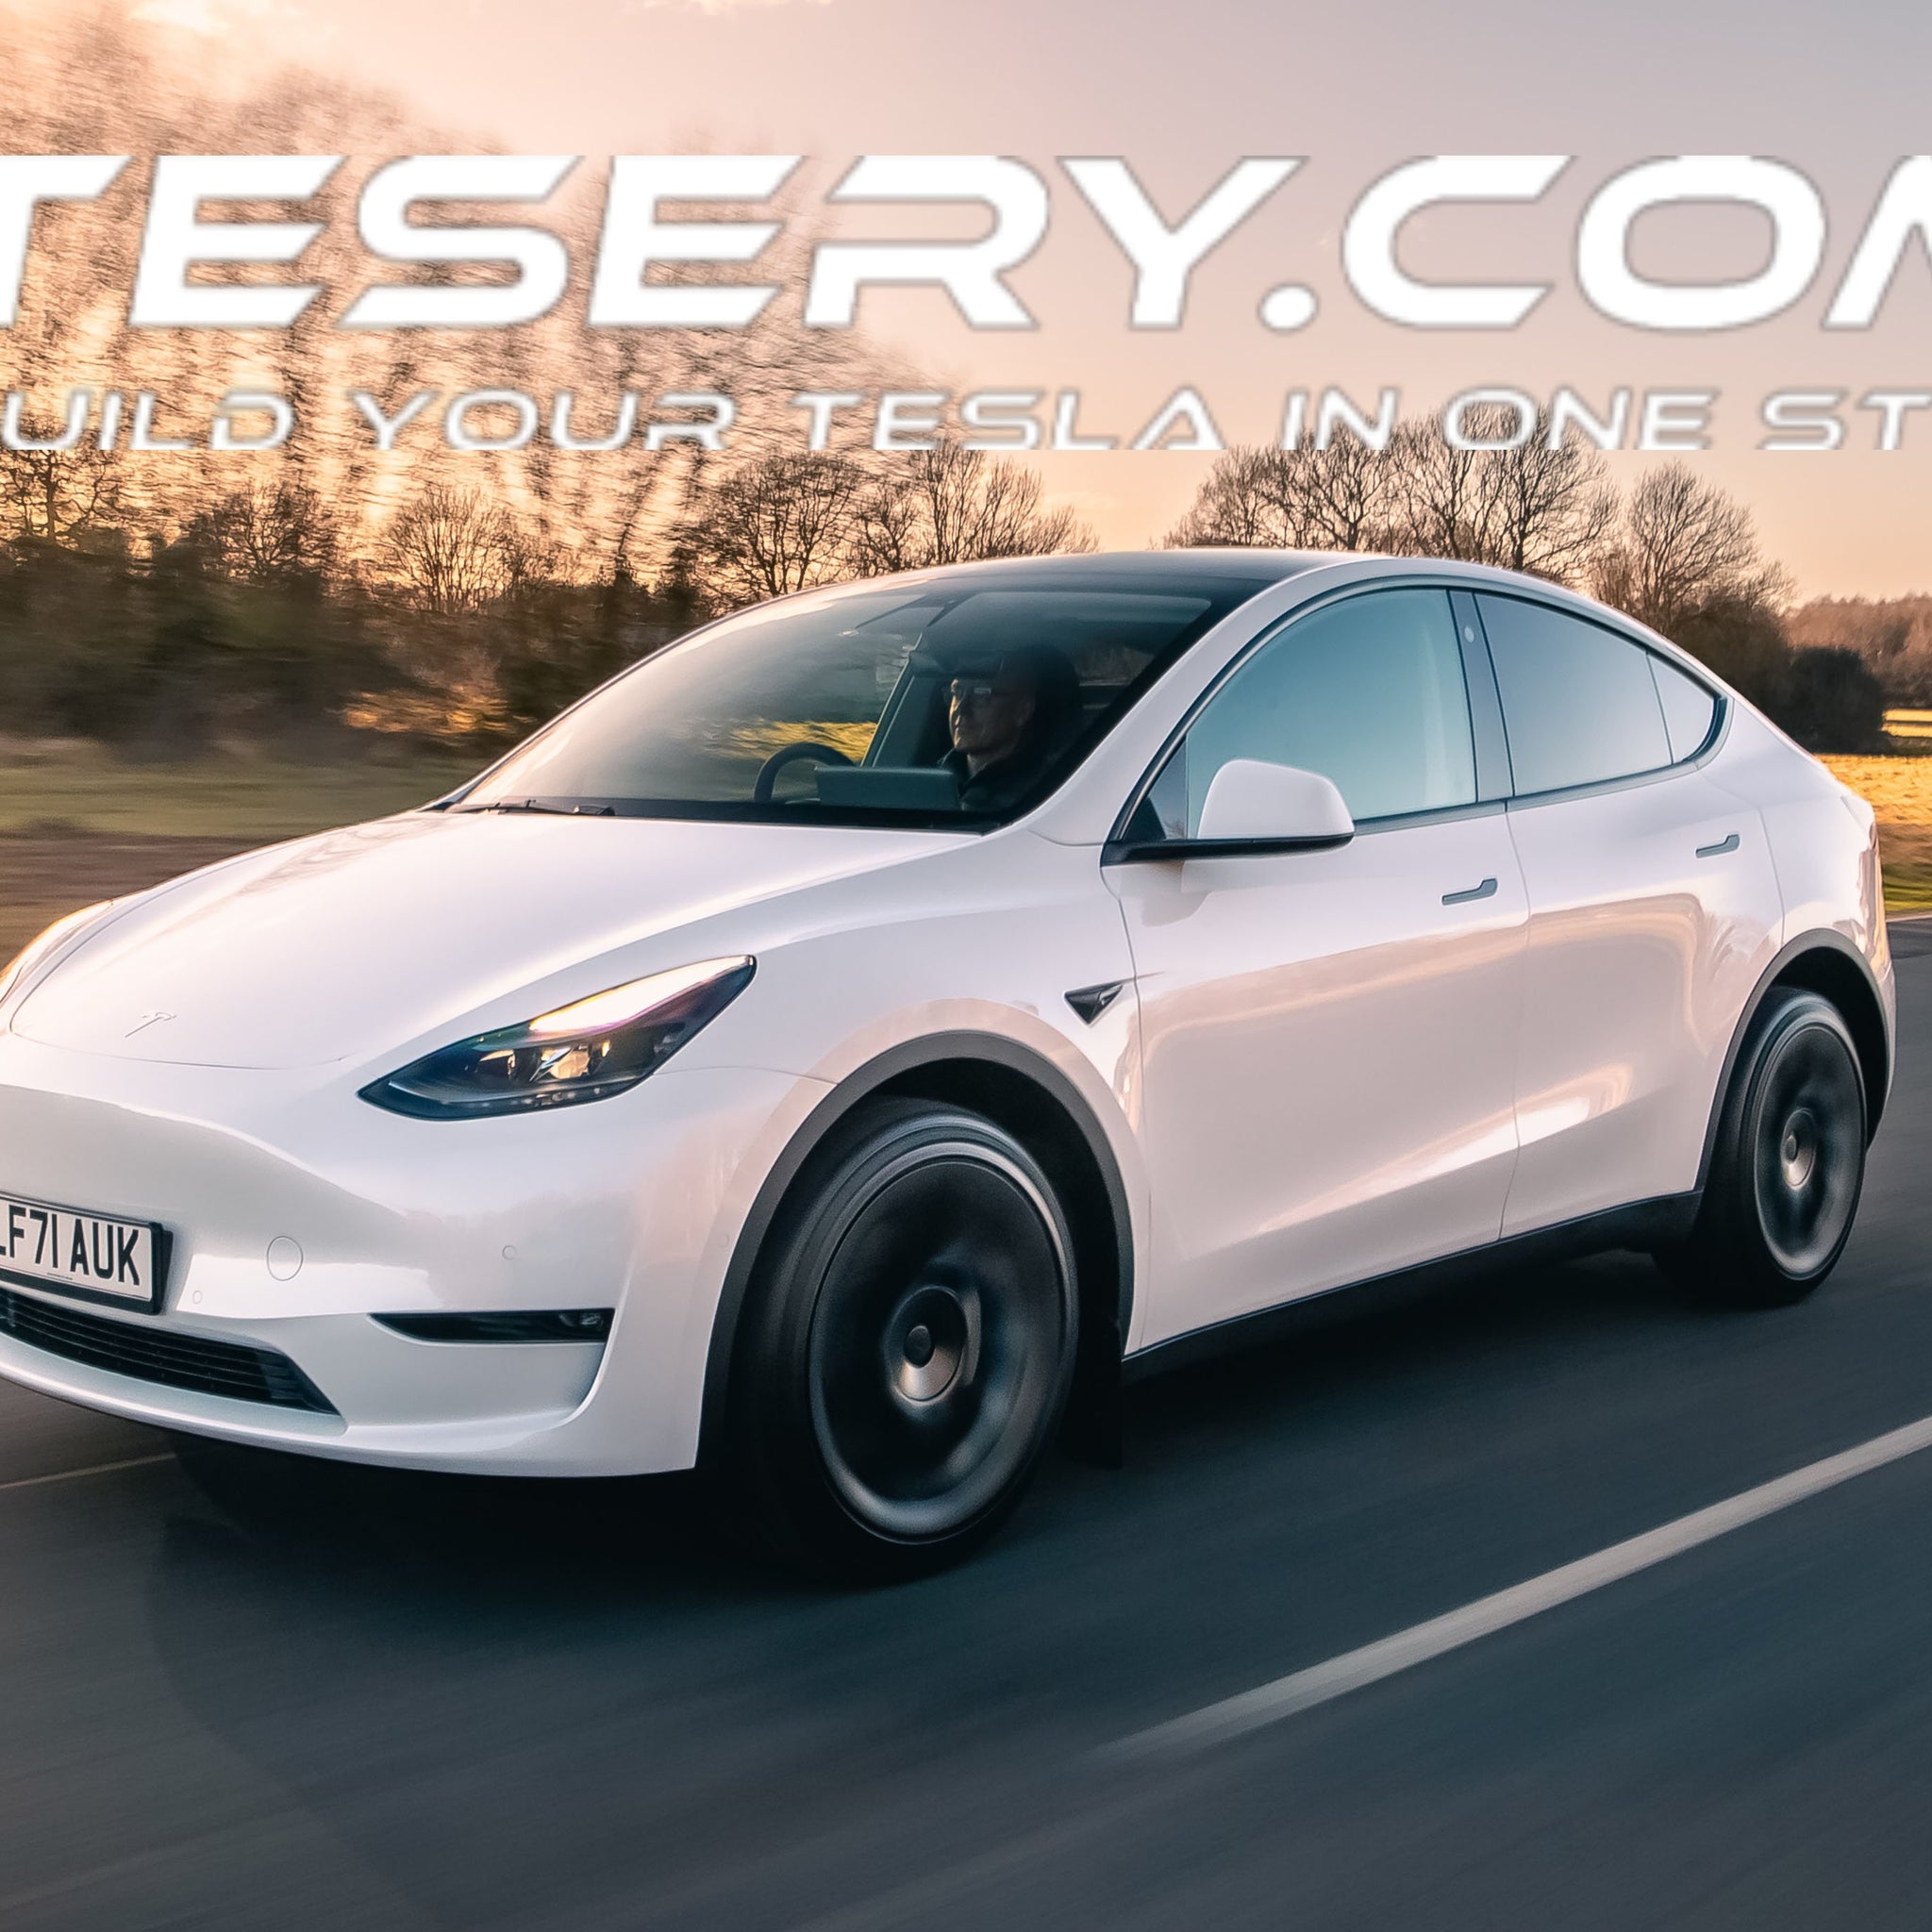 Exciting Times for Tesla Model 3 Highland Owners in Europe: Deliveries Underway in The Netherlands and Germany - Tesery Official Store